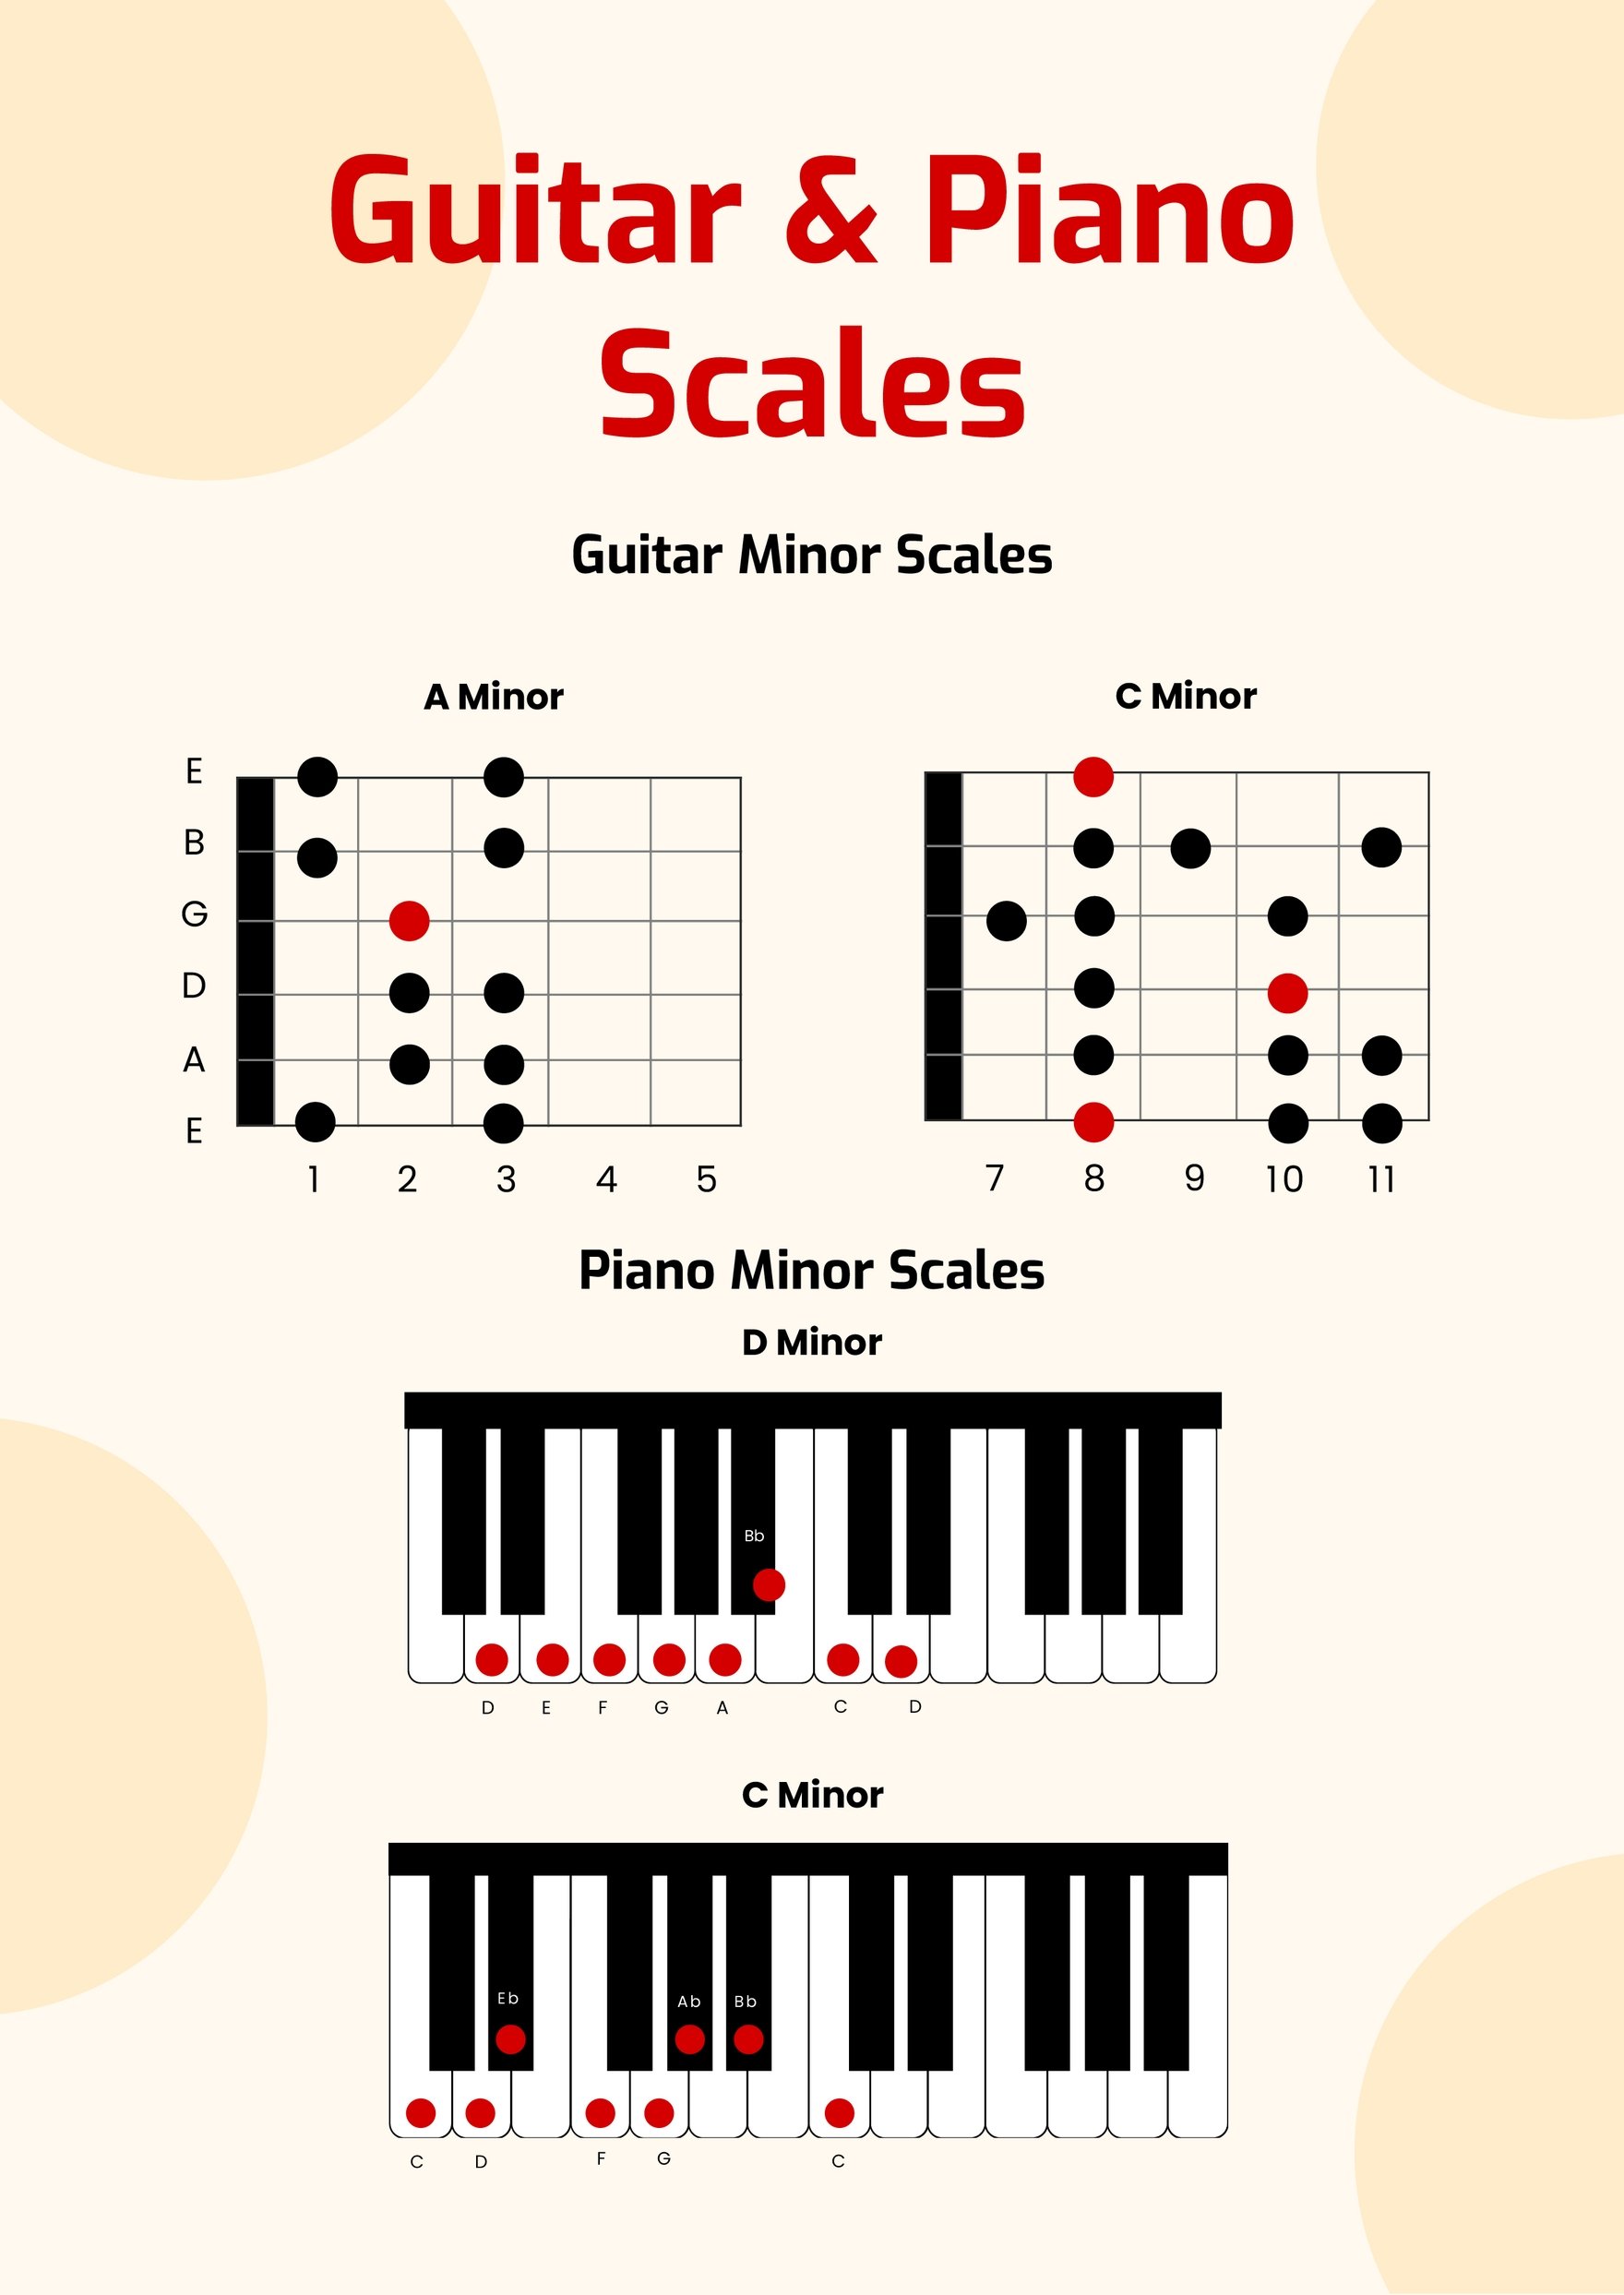 piano scales chart for beginners